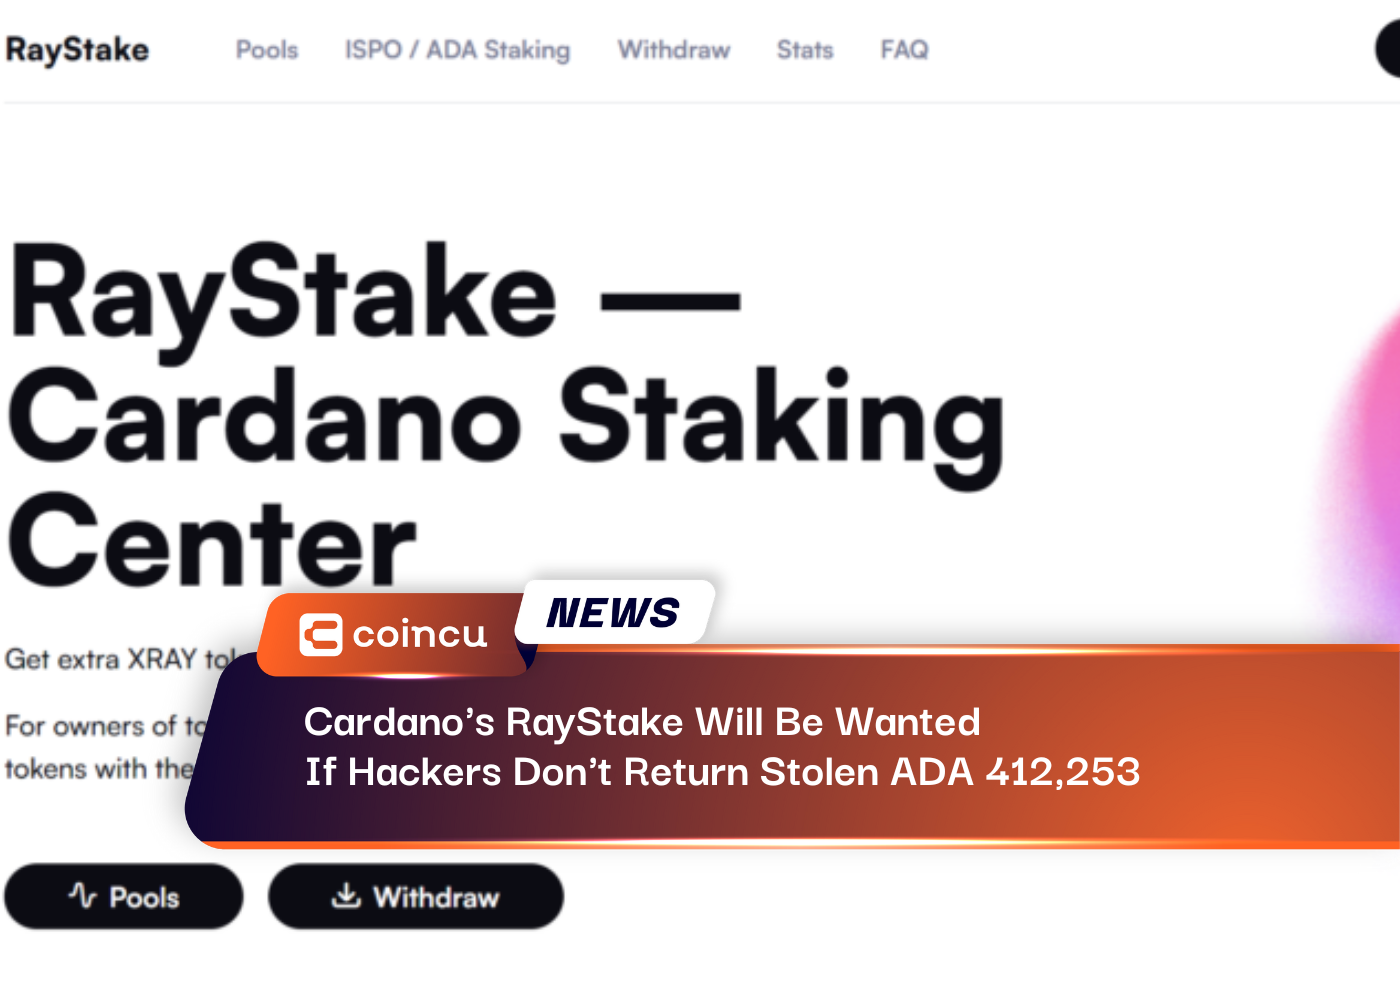 Cardano’s RayStake Will Be Wanted If Hackers Don’t Return Stolen ADA 412,253